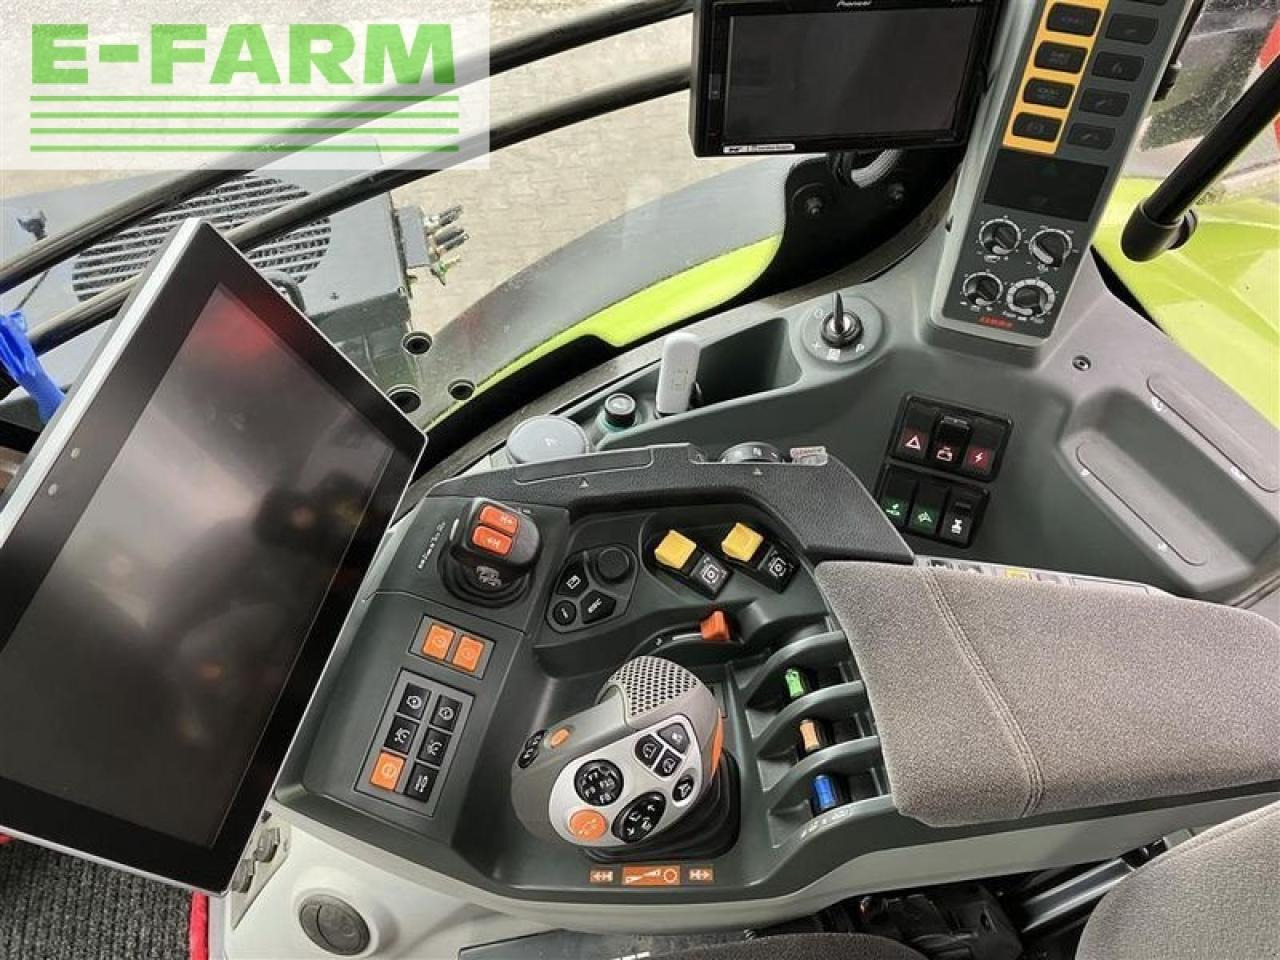 Tracteur agricole CLAAS axion 930 cmatic st5 cebis